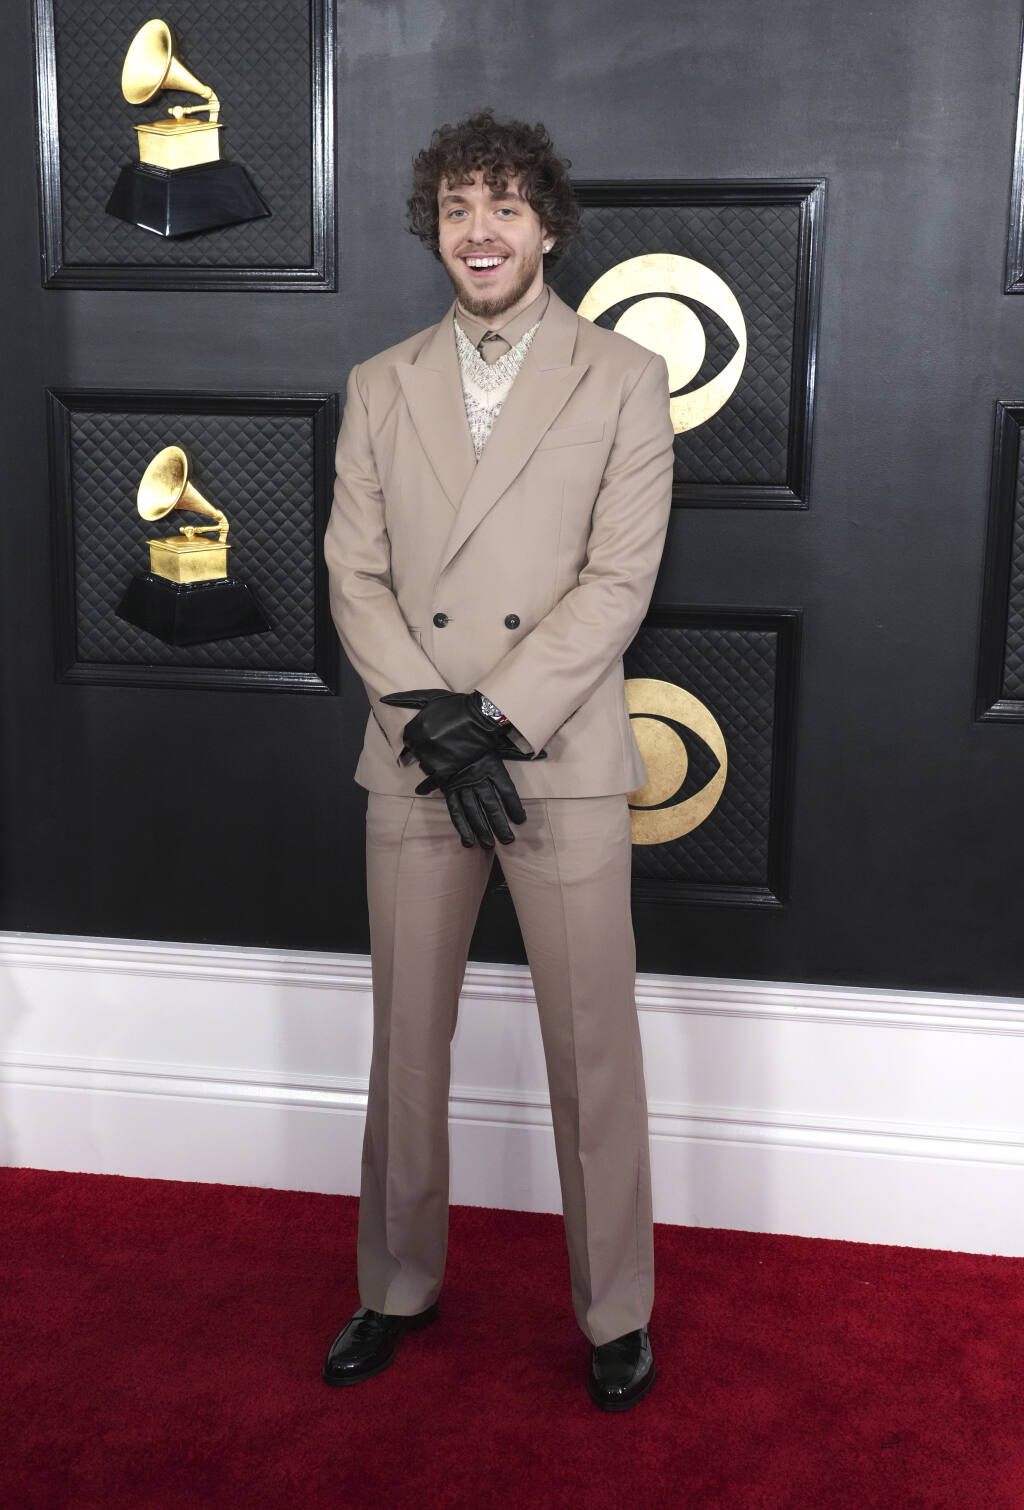 Photos: Looks and trends from the 2023 Grammys red carpet - The